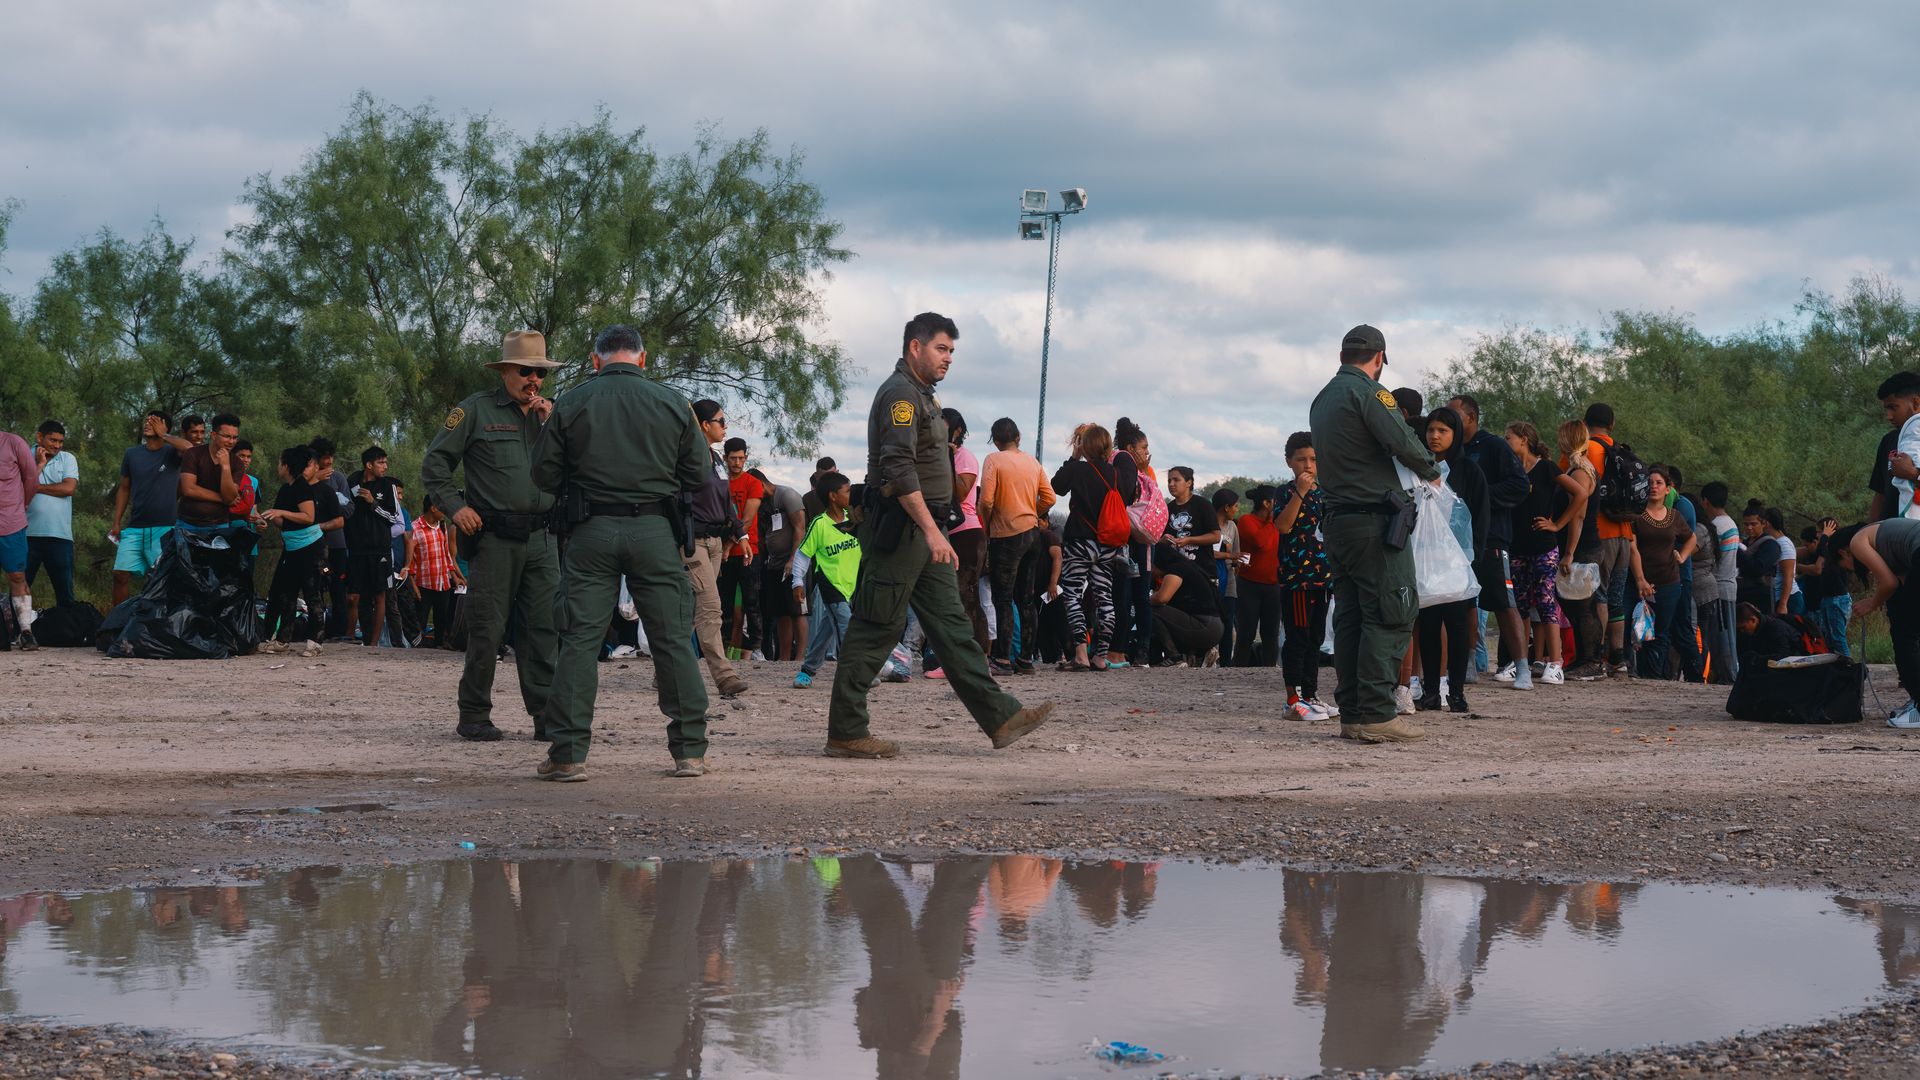 Migrants wait in line to be processed by US Border Patrol agents after crossing the Rio Grande River in Eagle Pass, Texas